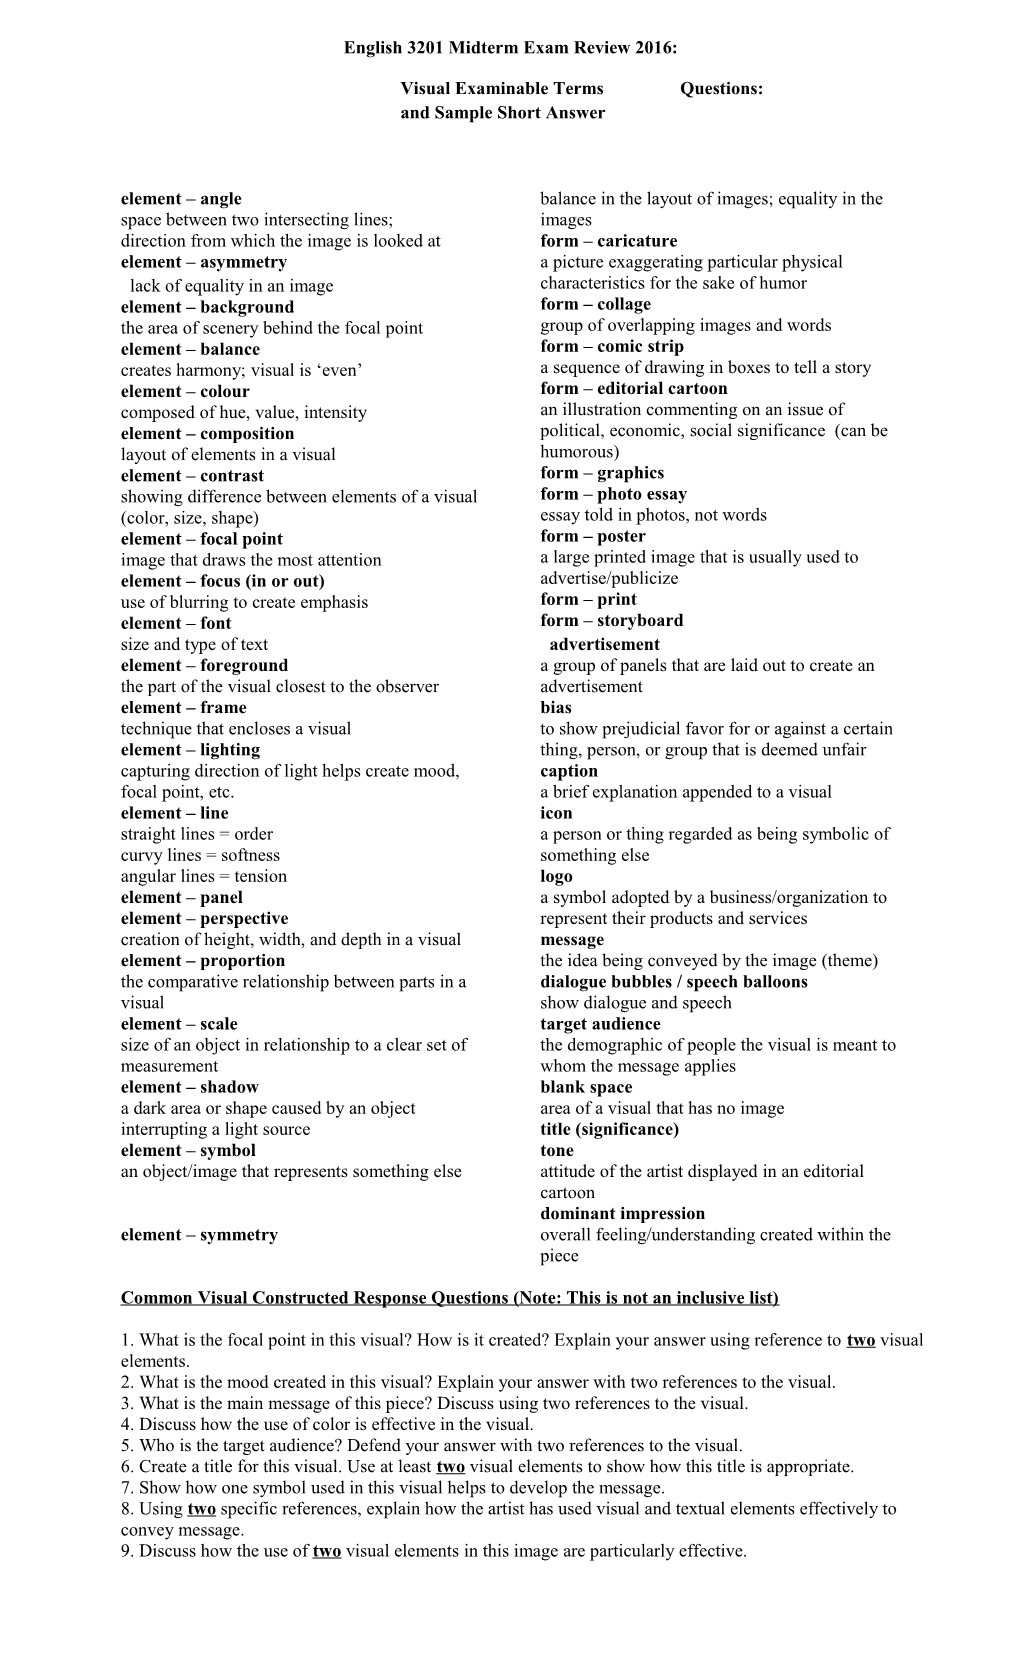 Visual Examinable Terms and Sample Short Answer Questions